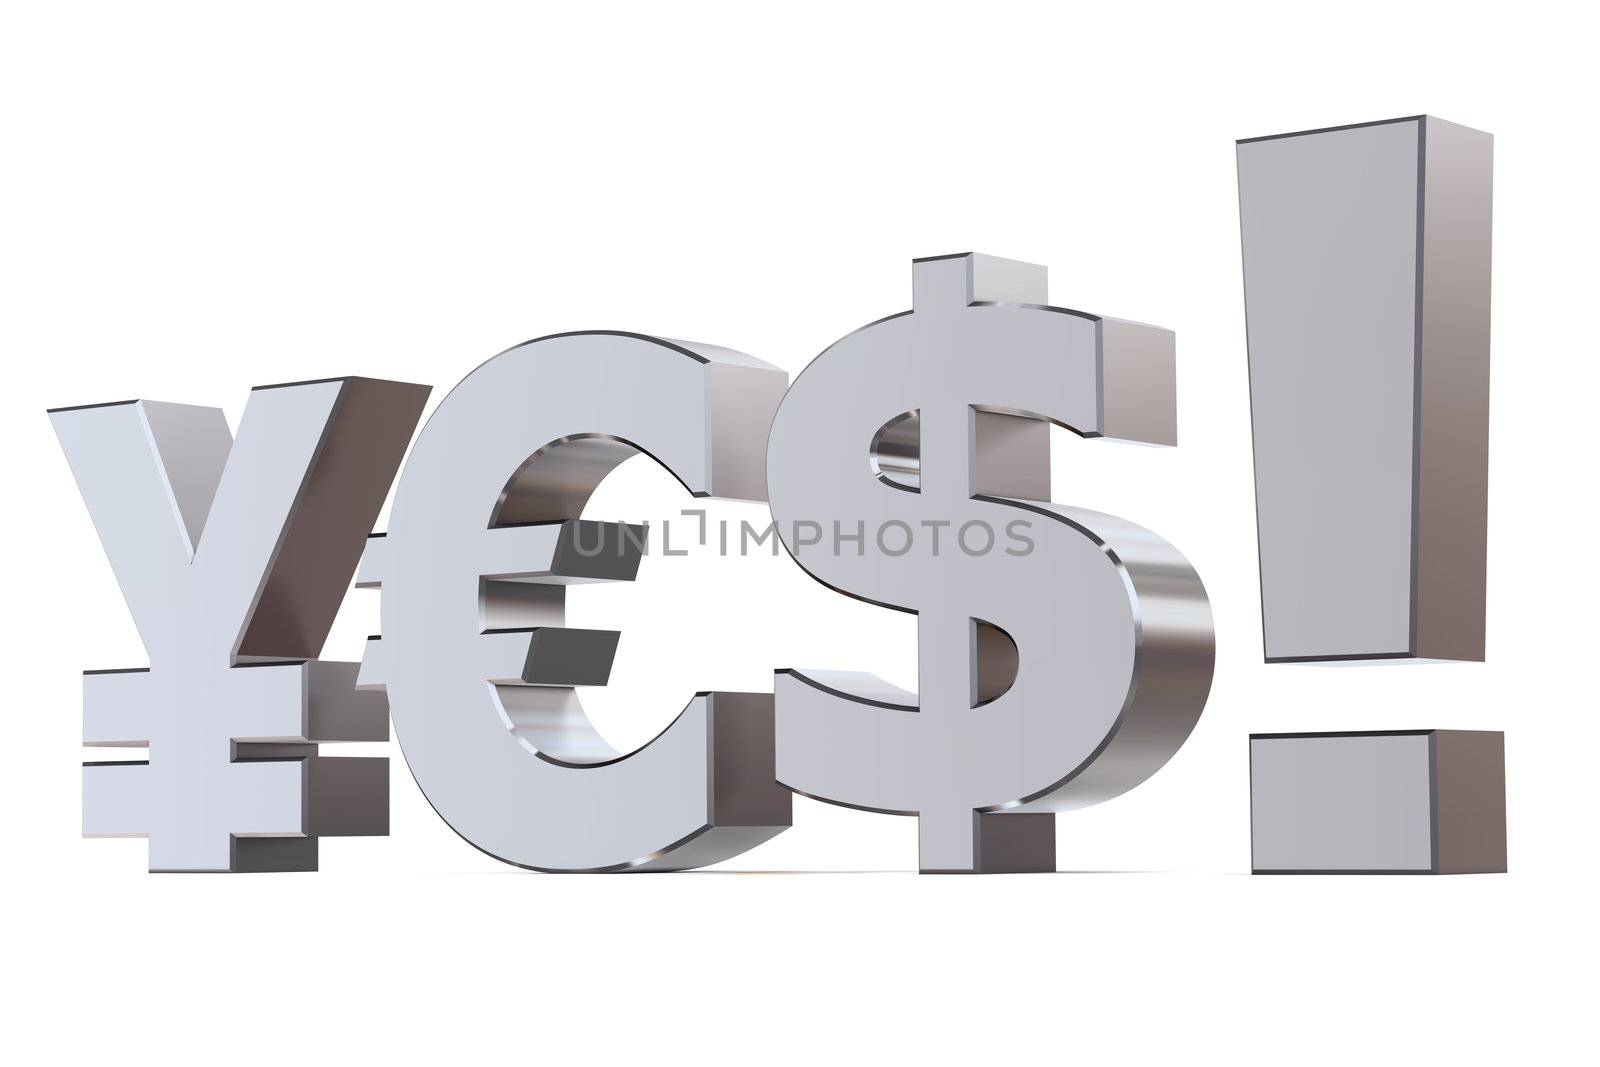 shiny metallic word YES! with a Yen symbol for the letter y, an Euro symbol for the letter e and a Dollar symbol for the letter s